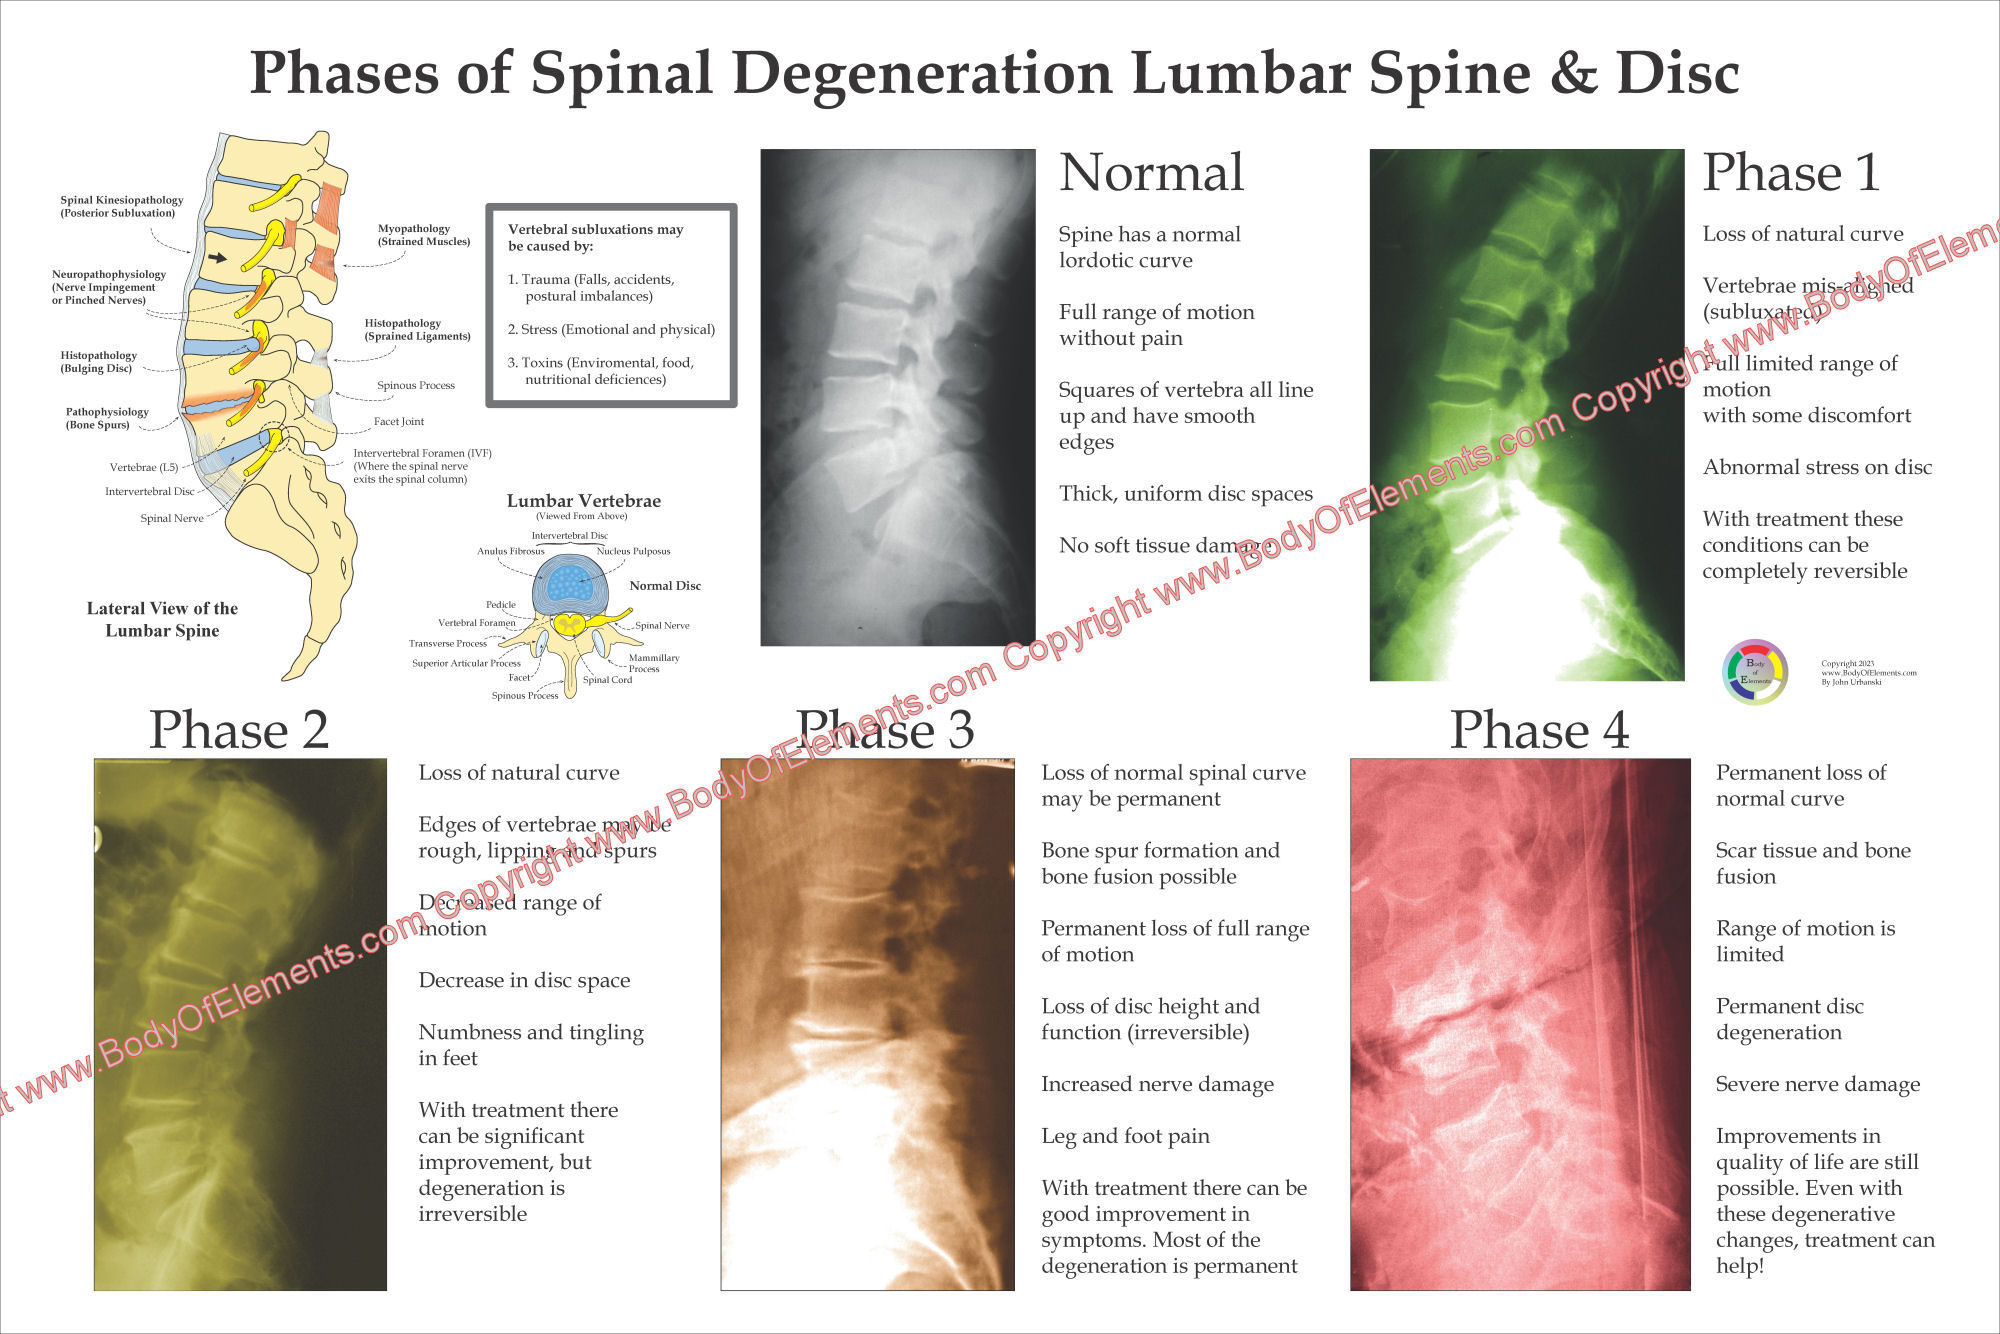 Phases of Spinal Degeneration Poster 24 x 36